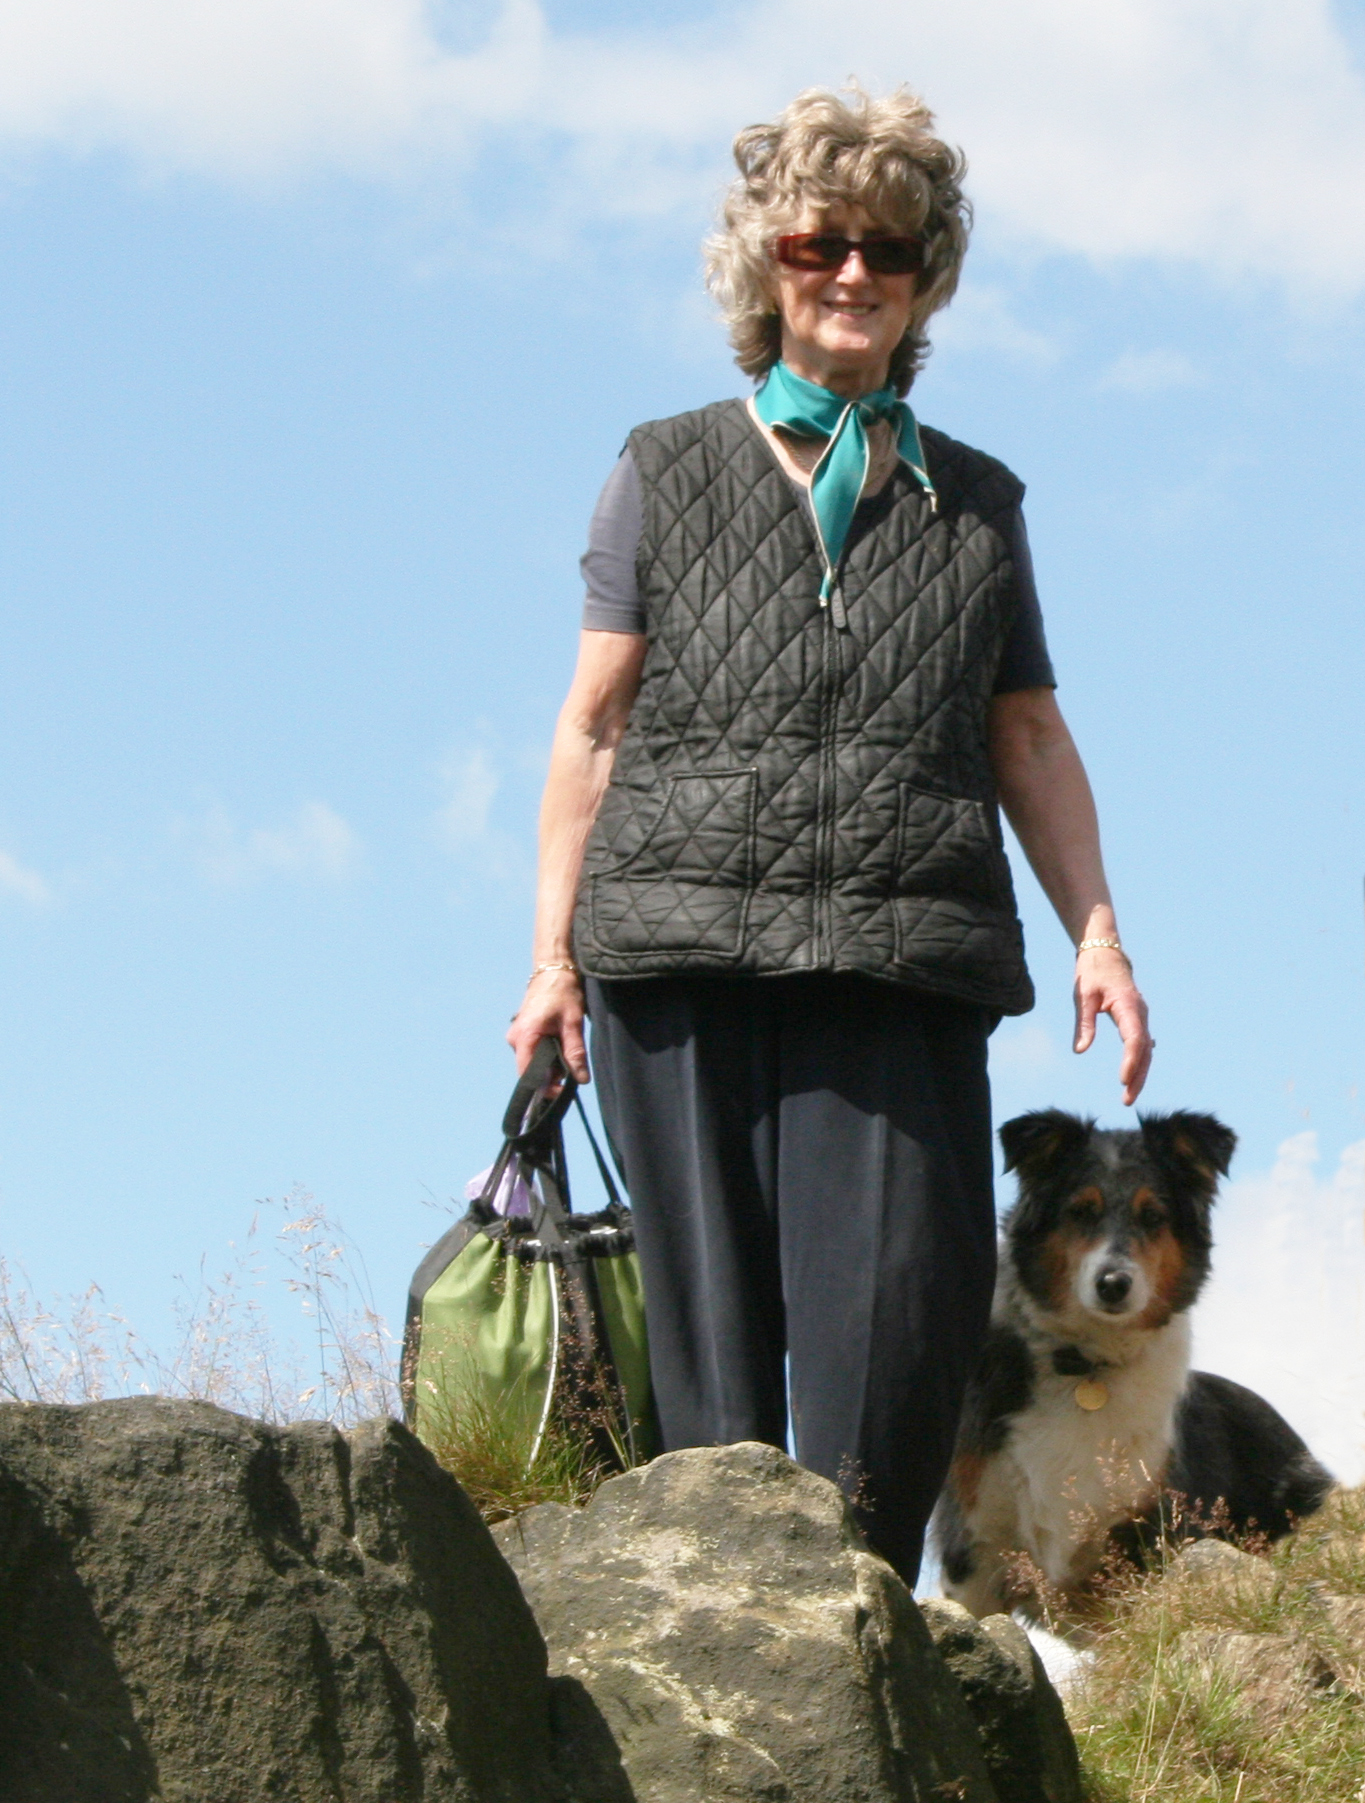 Misty with Irene on Bardon Hill, Leicestershire